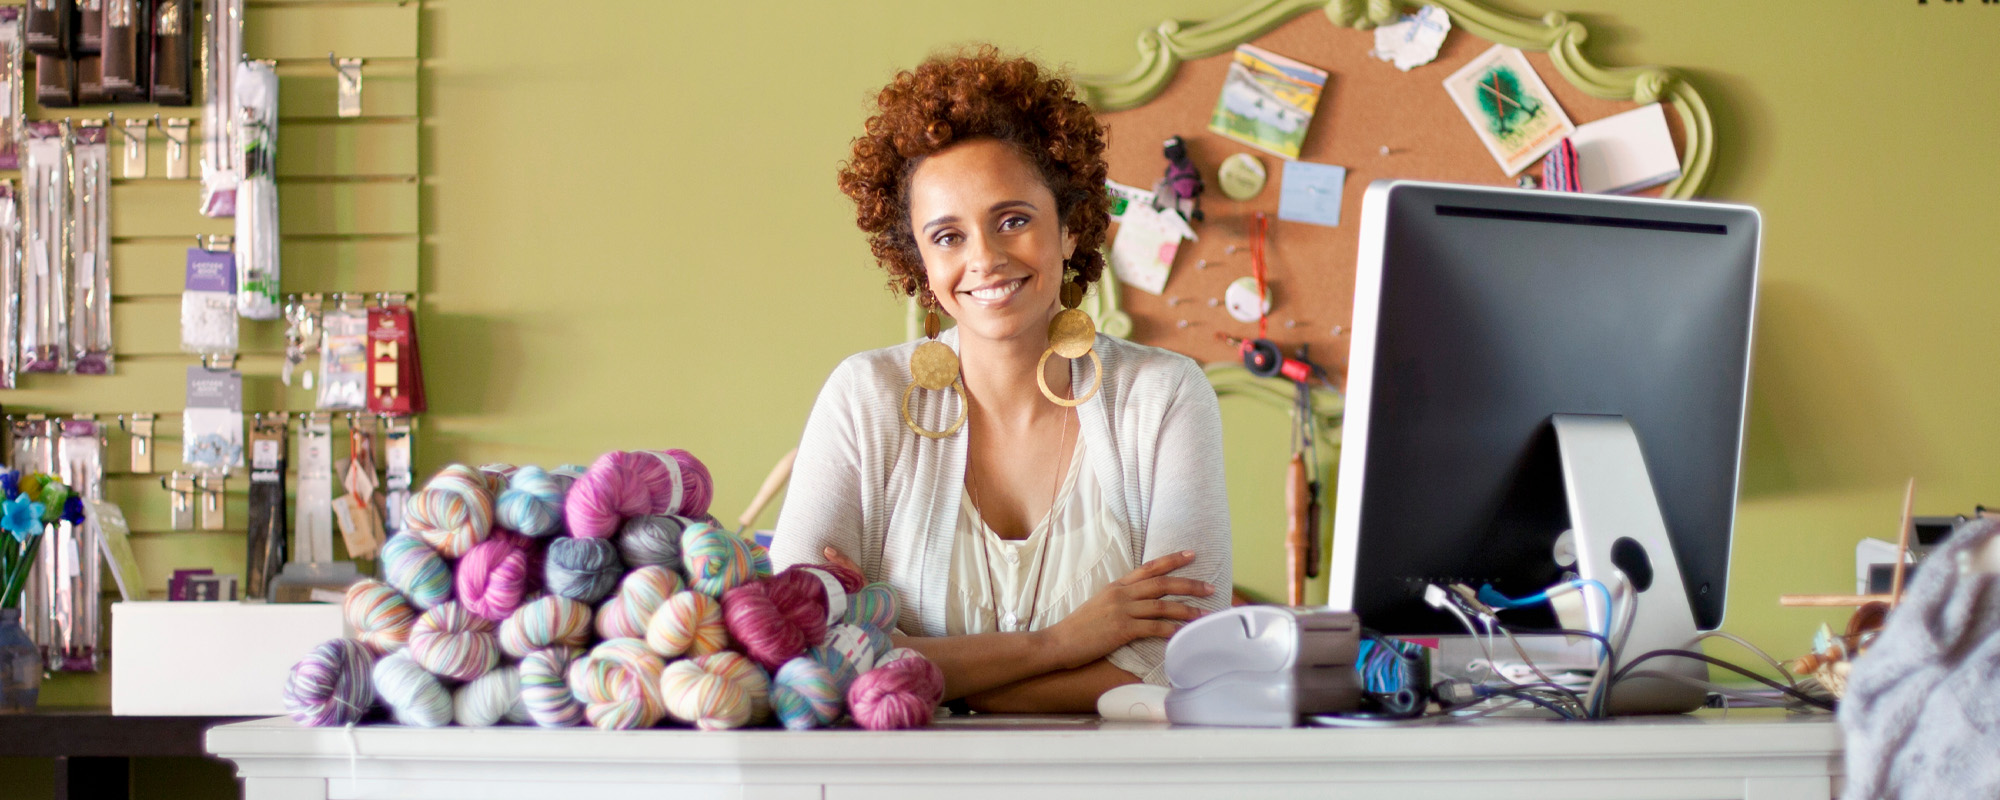 business owner of yarn shop at counter